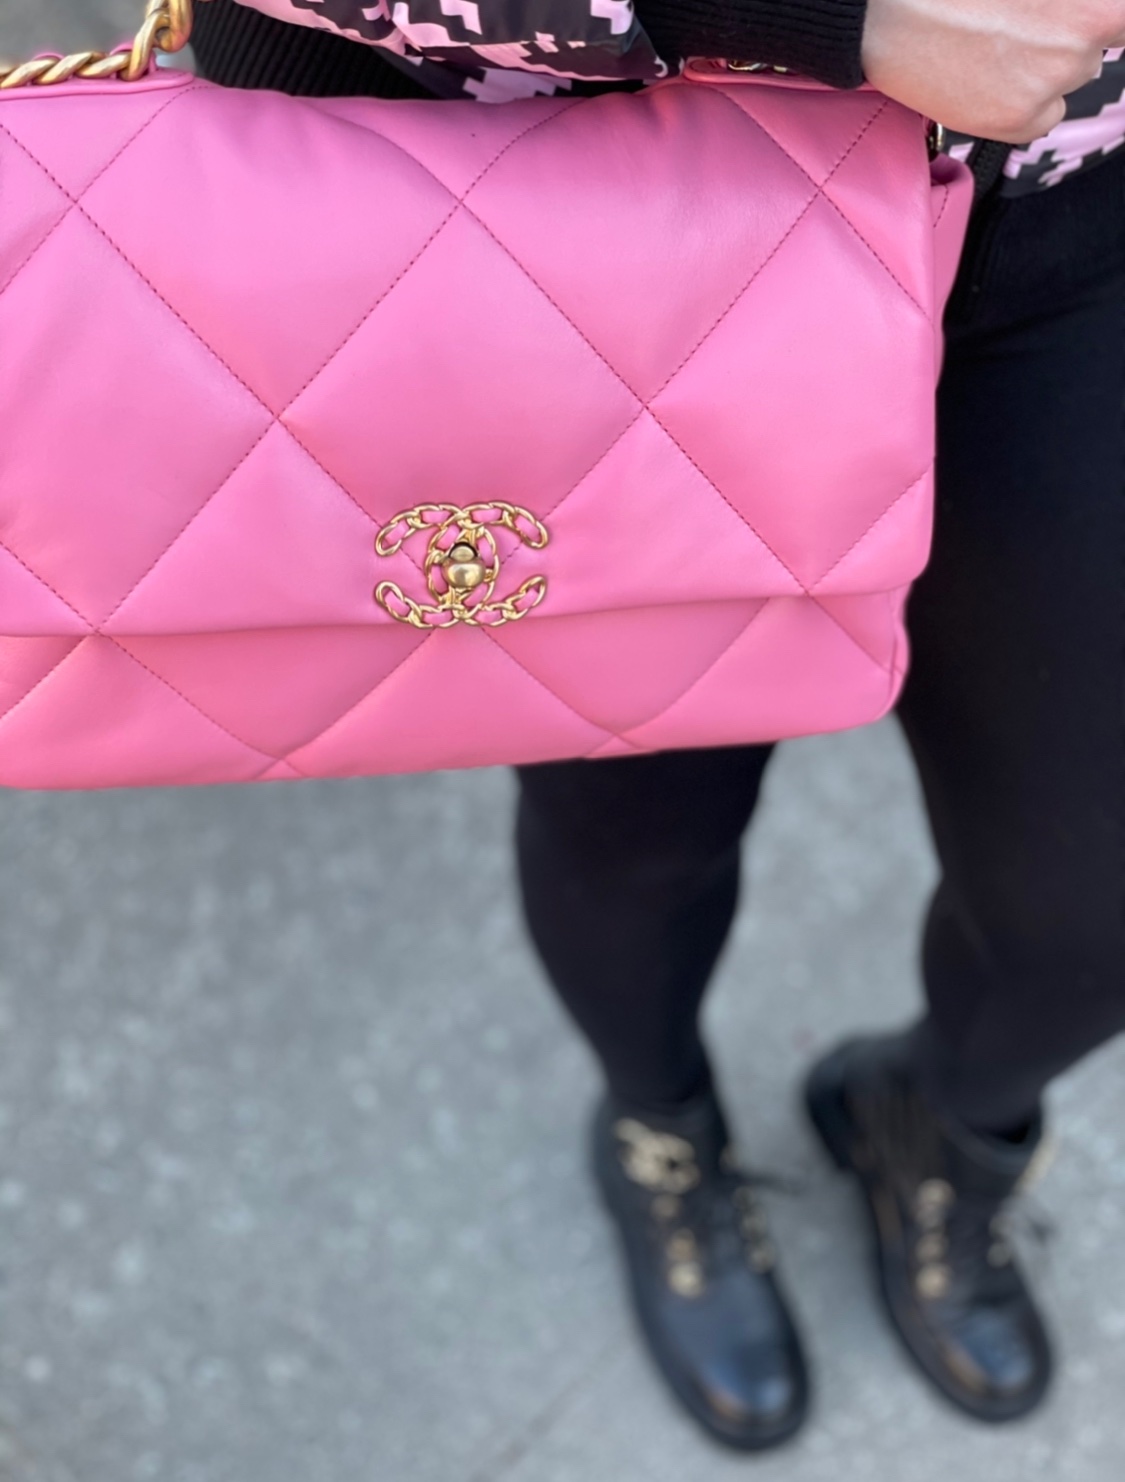 The new Chanel 19 bag is what handbag dreams are made of